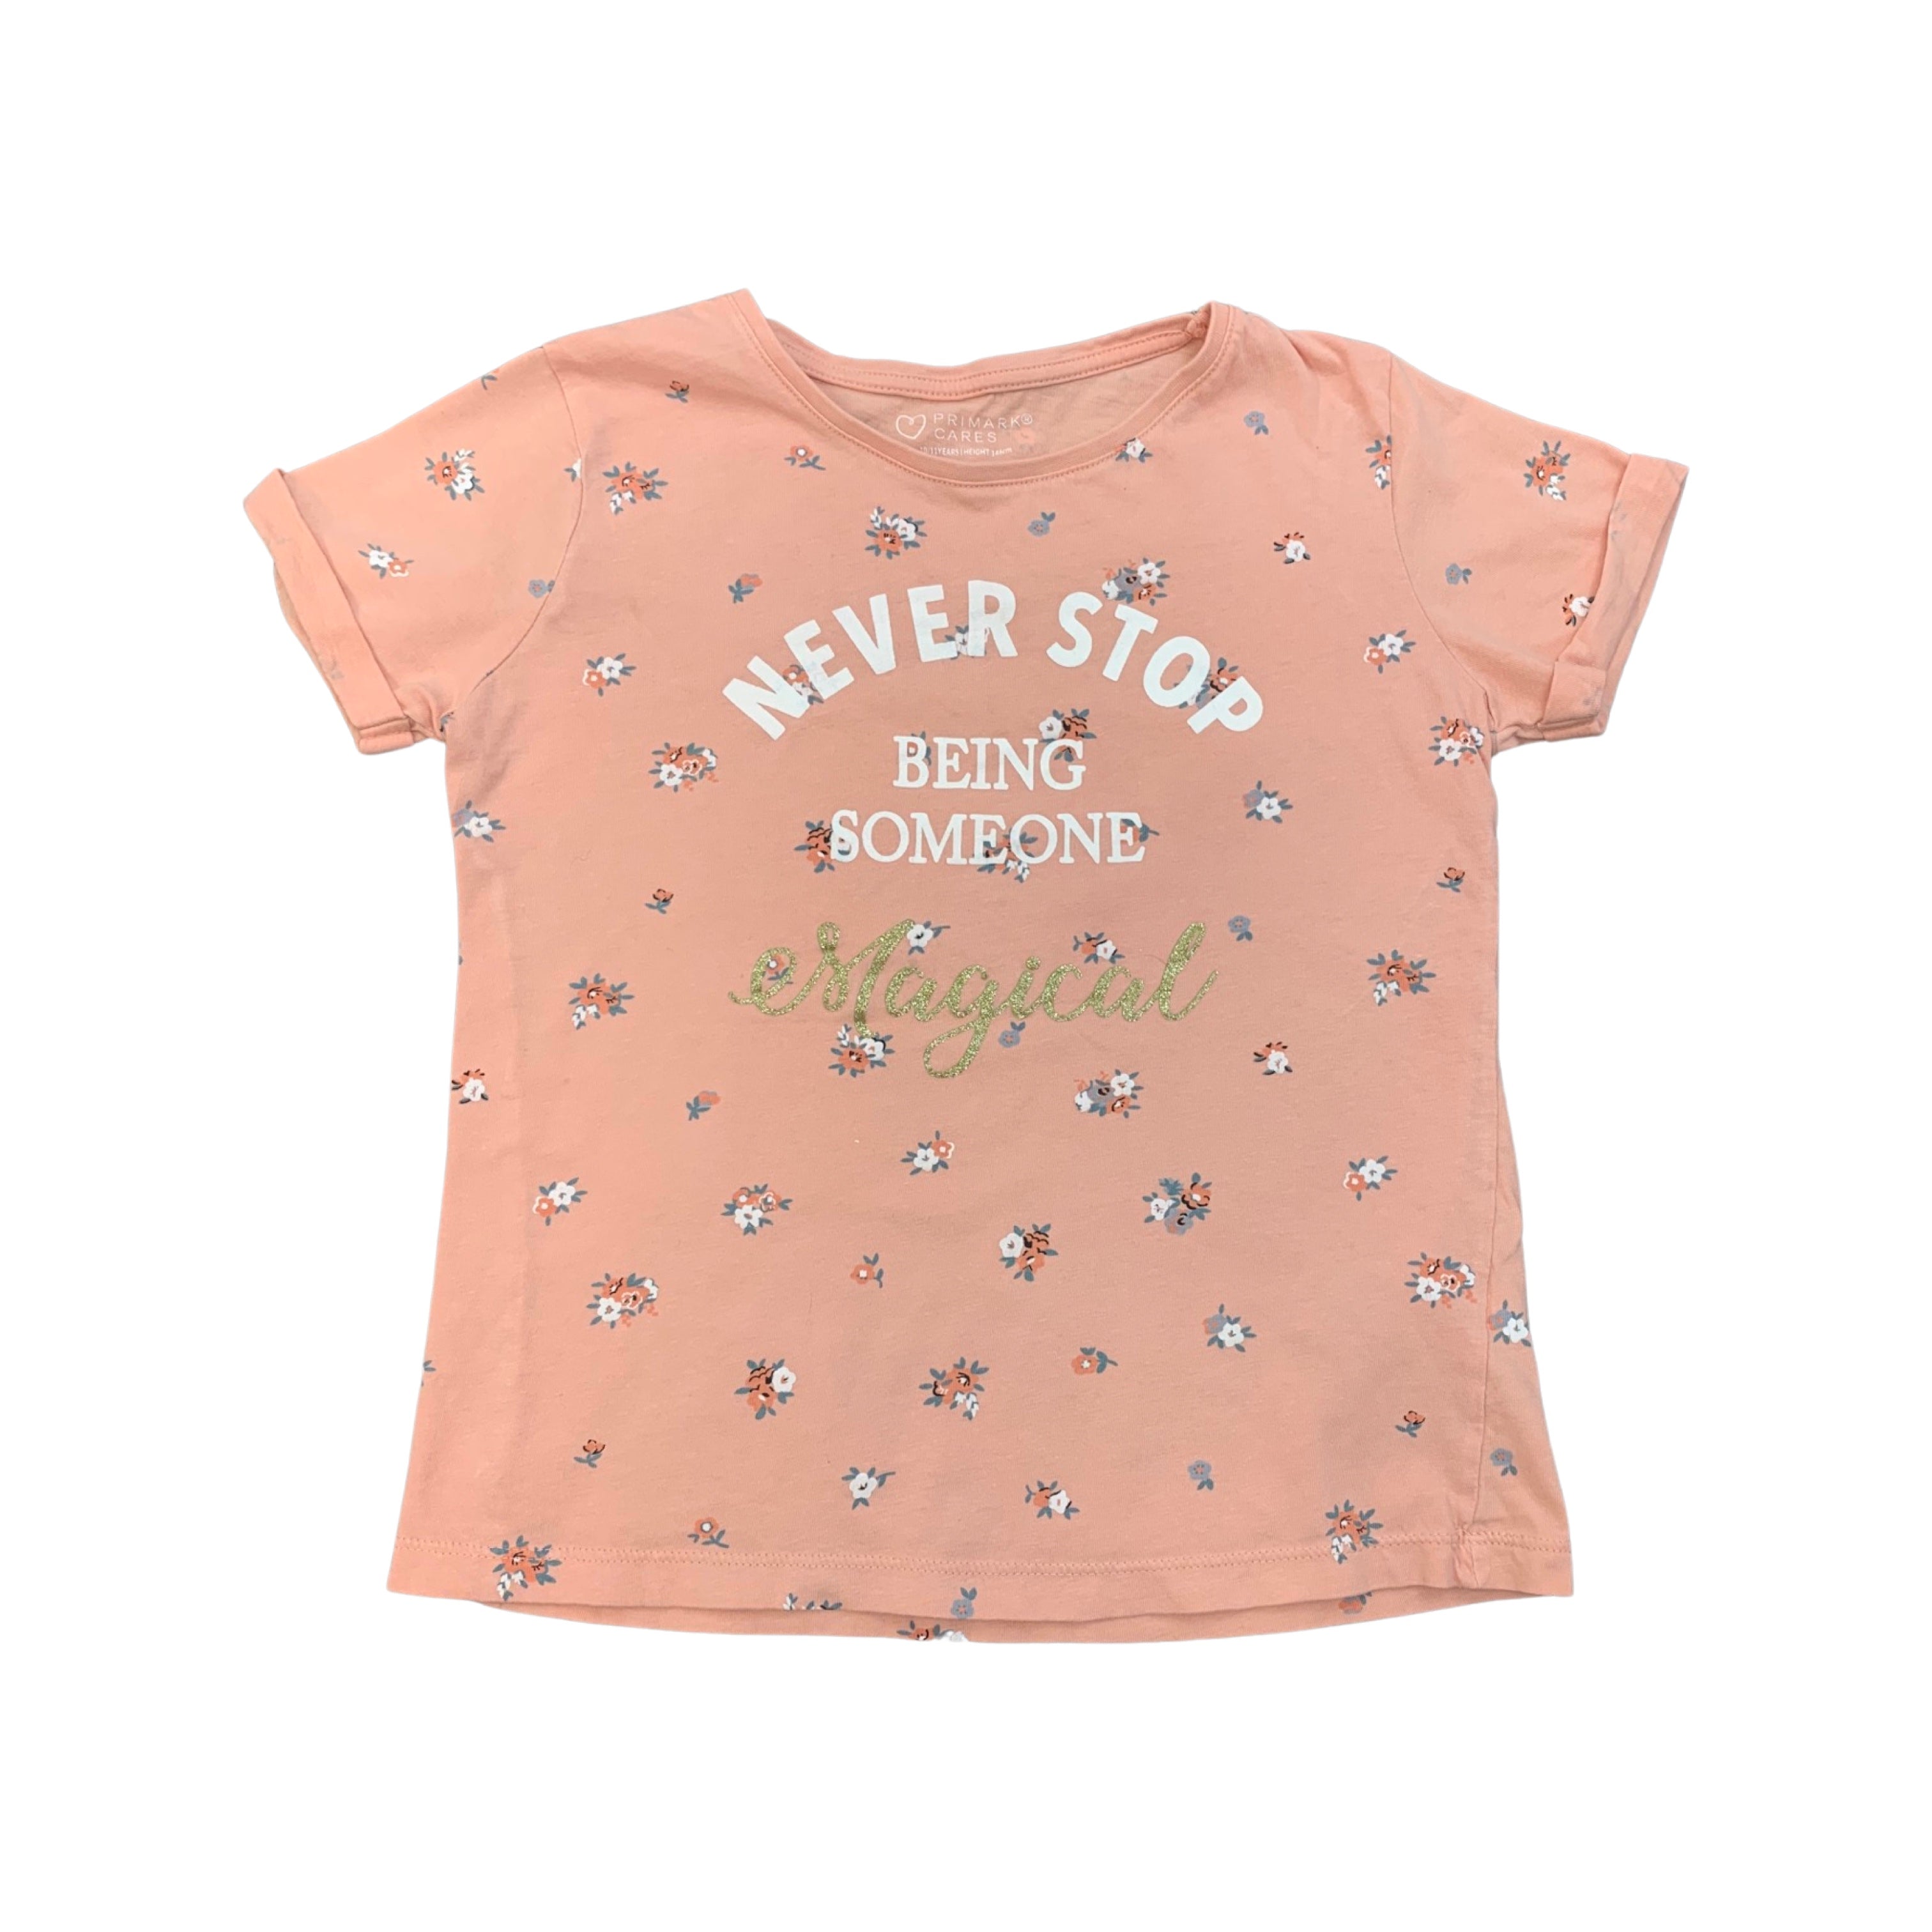 Primark 'Never Stop Being Someone Magical' T Shirt Girls 10-11 Years